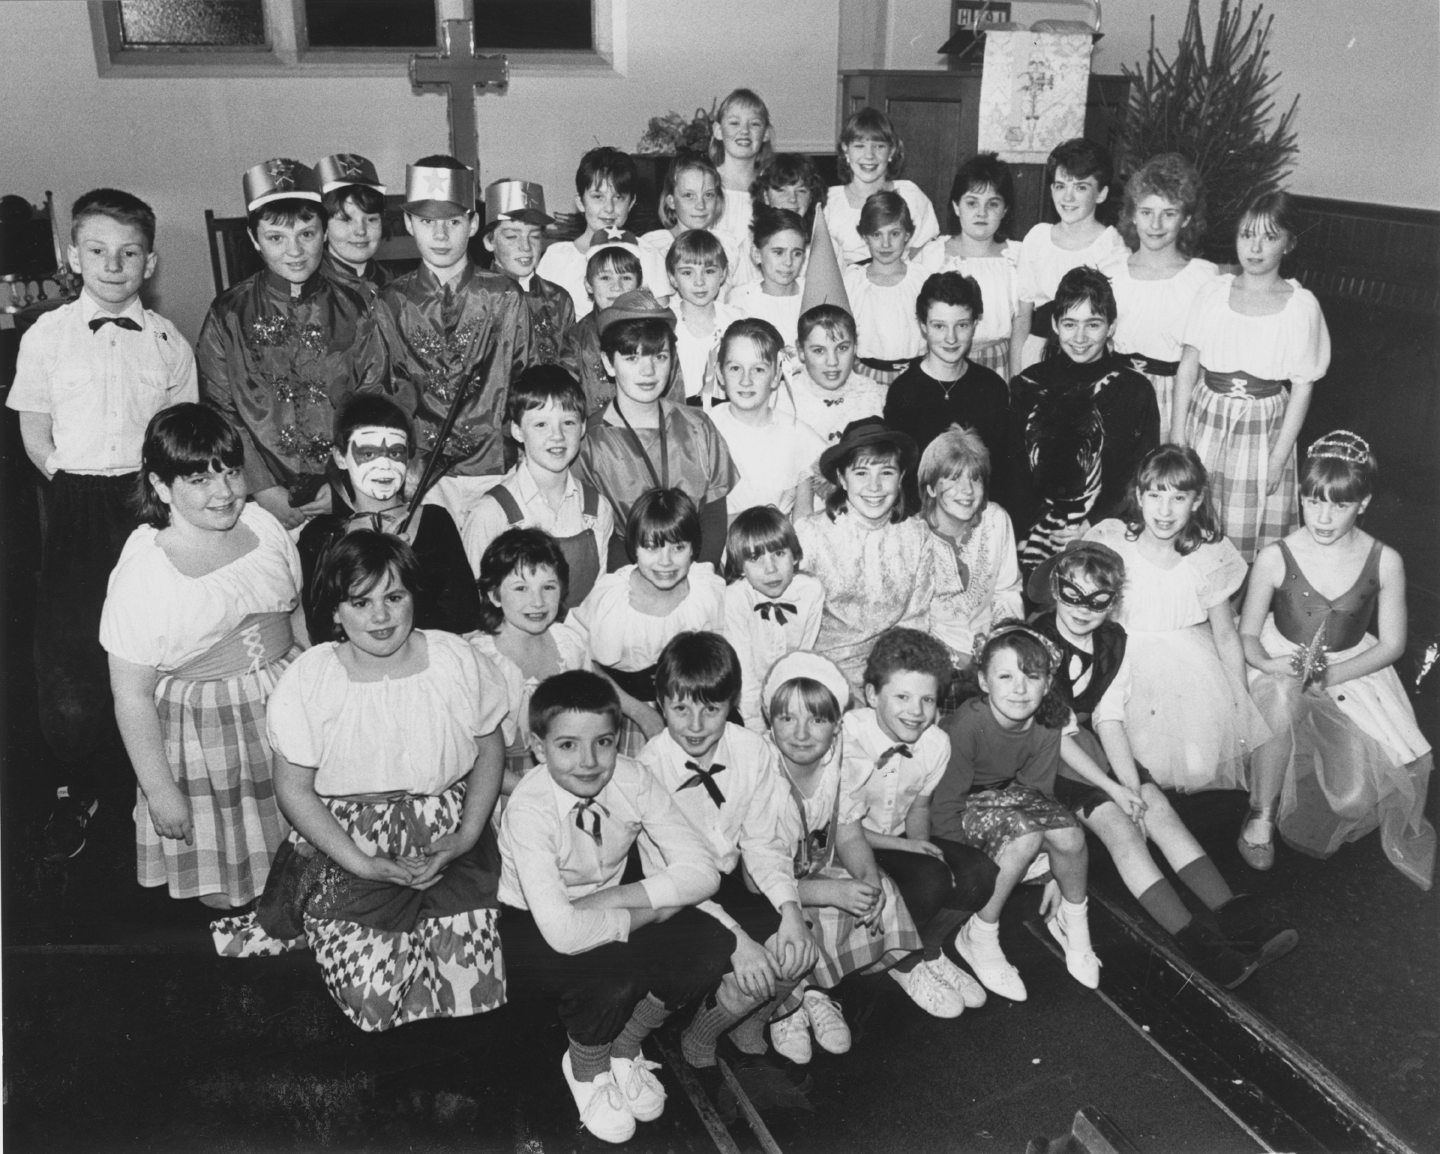 P6 and P7 pupils of Walker Road School who were taking part in the production of Babes in The Wood in St Fittick's Church in 1988.